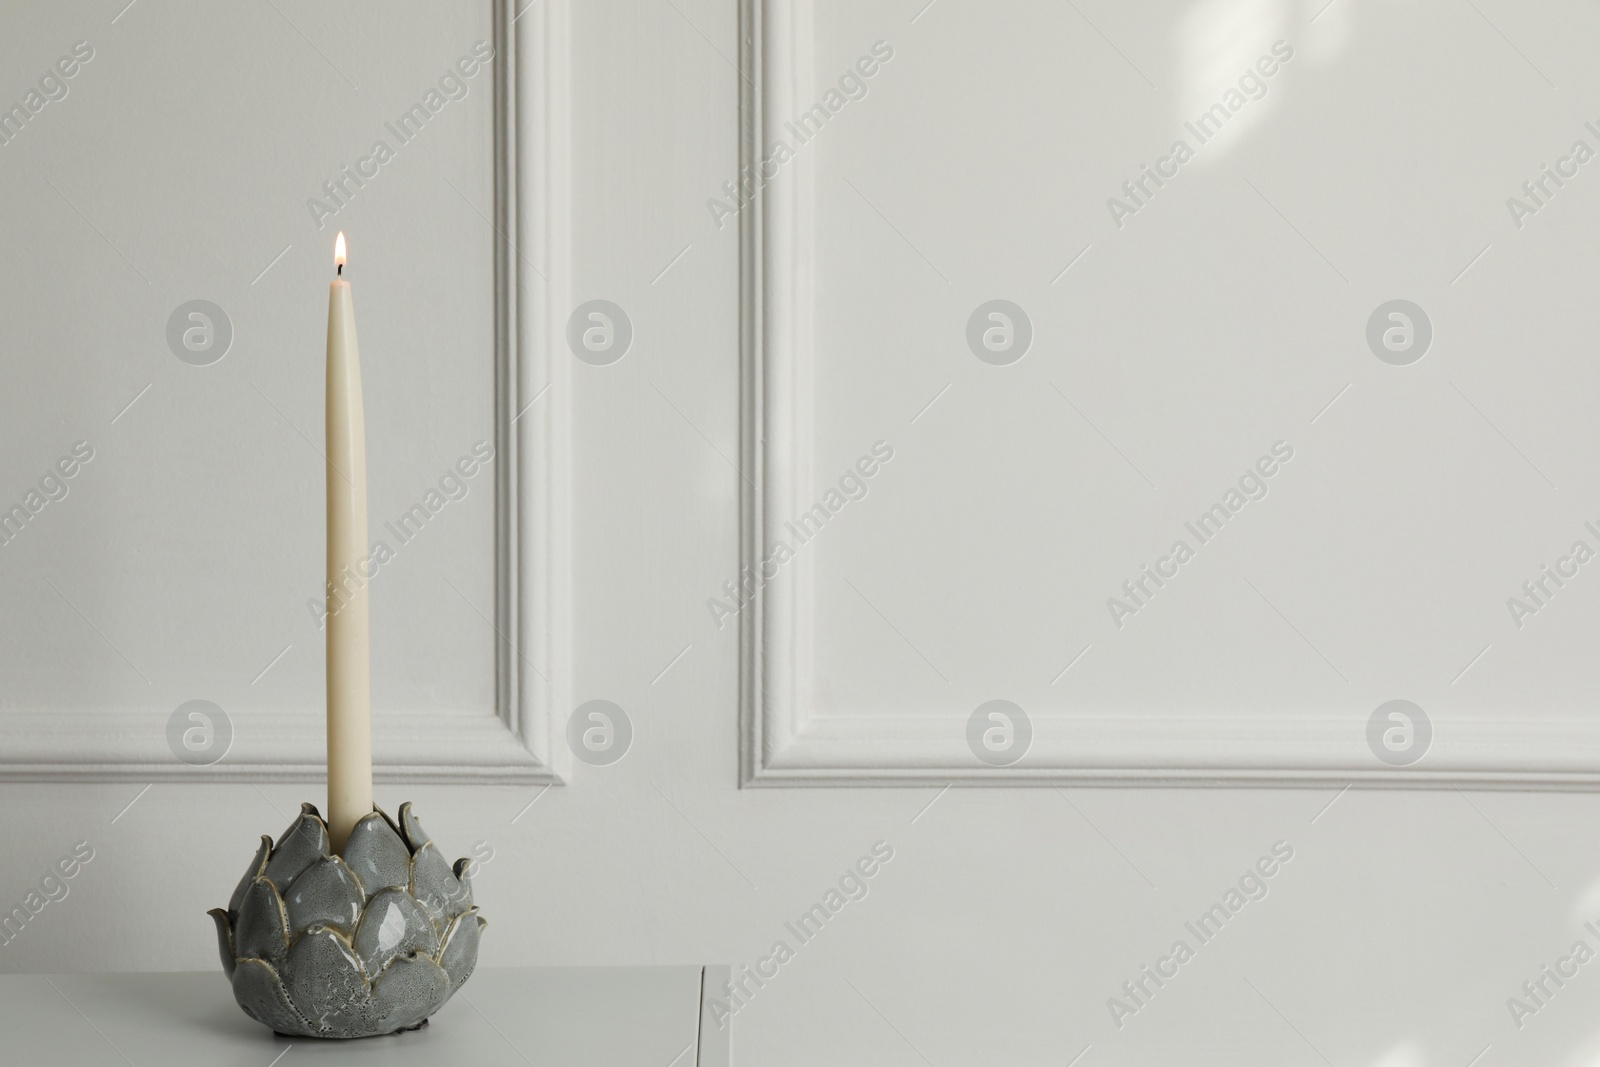 Photo of Holder with burning candle on table near white wall indoors, space for text